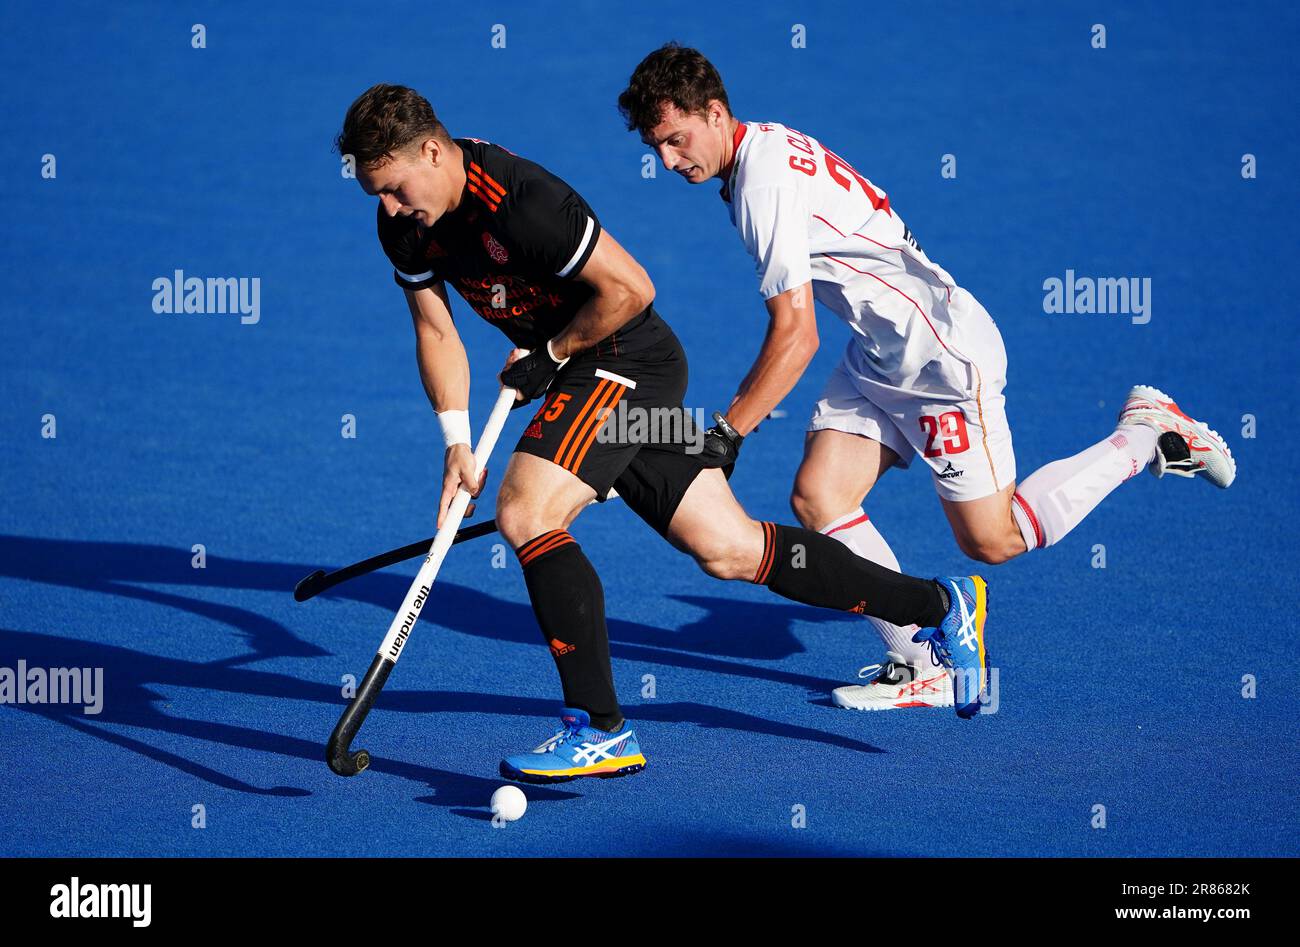 Netherlands' Pepijn Reyenga (left) and Spain's Gerard Clapes battle for the ball during the FIH Hockey Pro League match at Lee Valley, London. Picture date: Monday June 19, 2023. Stock Photo